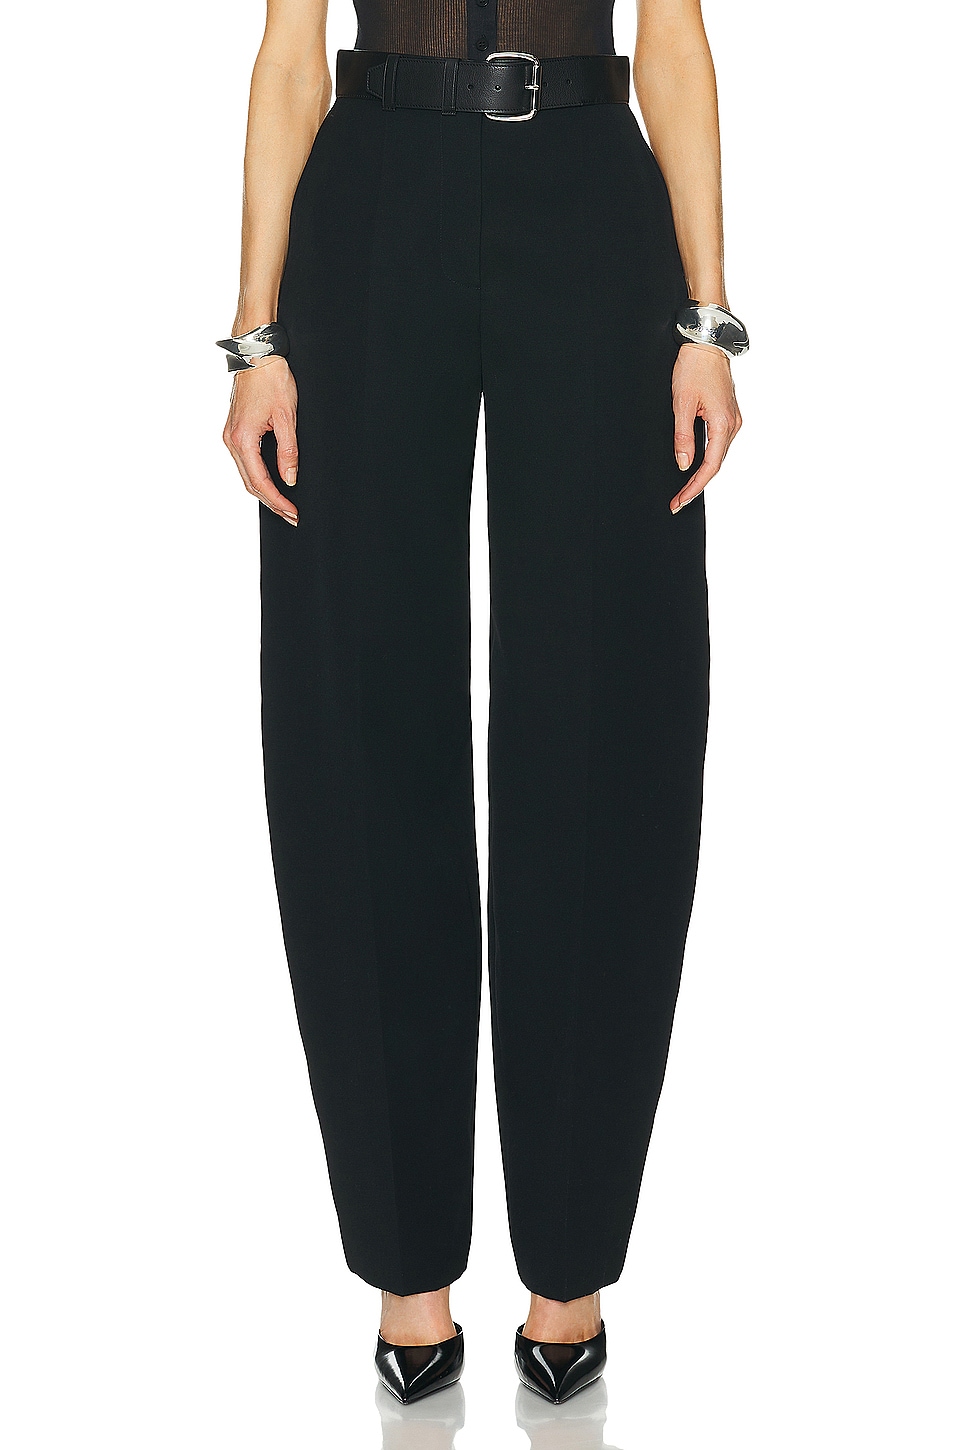 Image 1 of Alexander Wang Hi-waisted Trouser With Leather Belted Waistband in Black